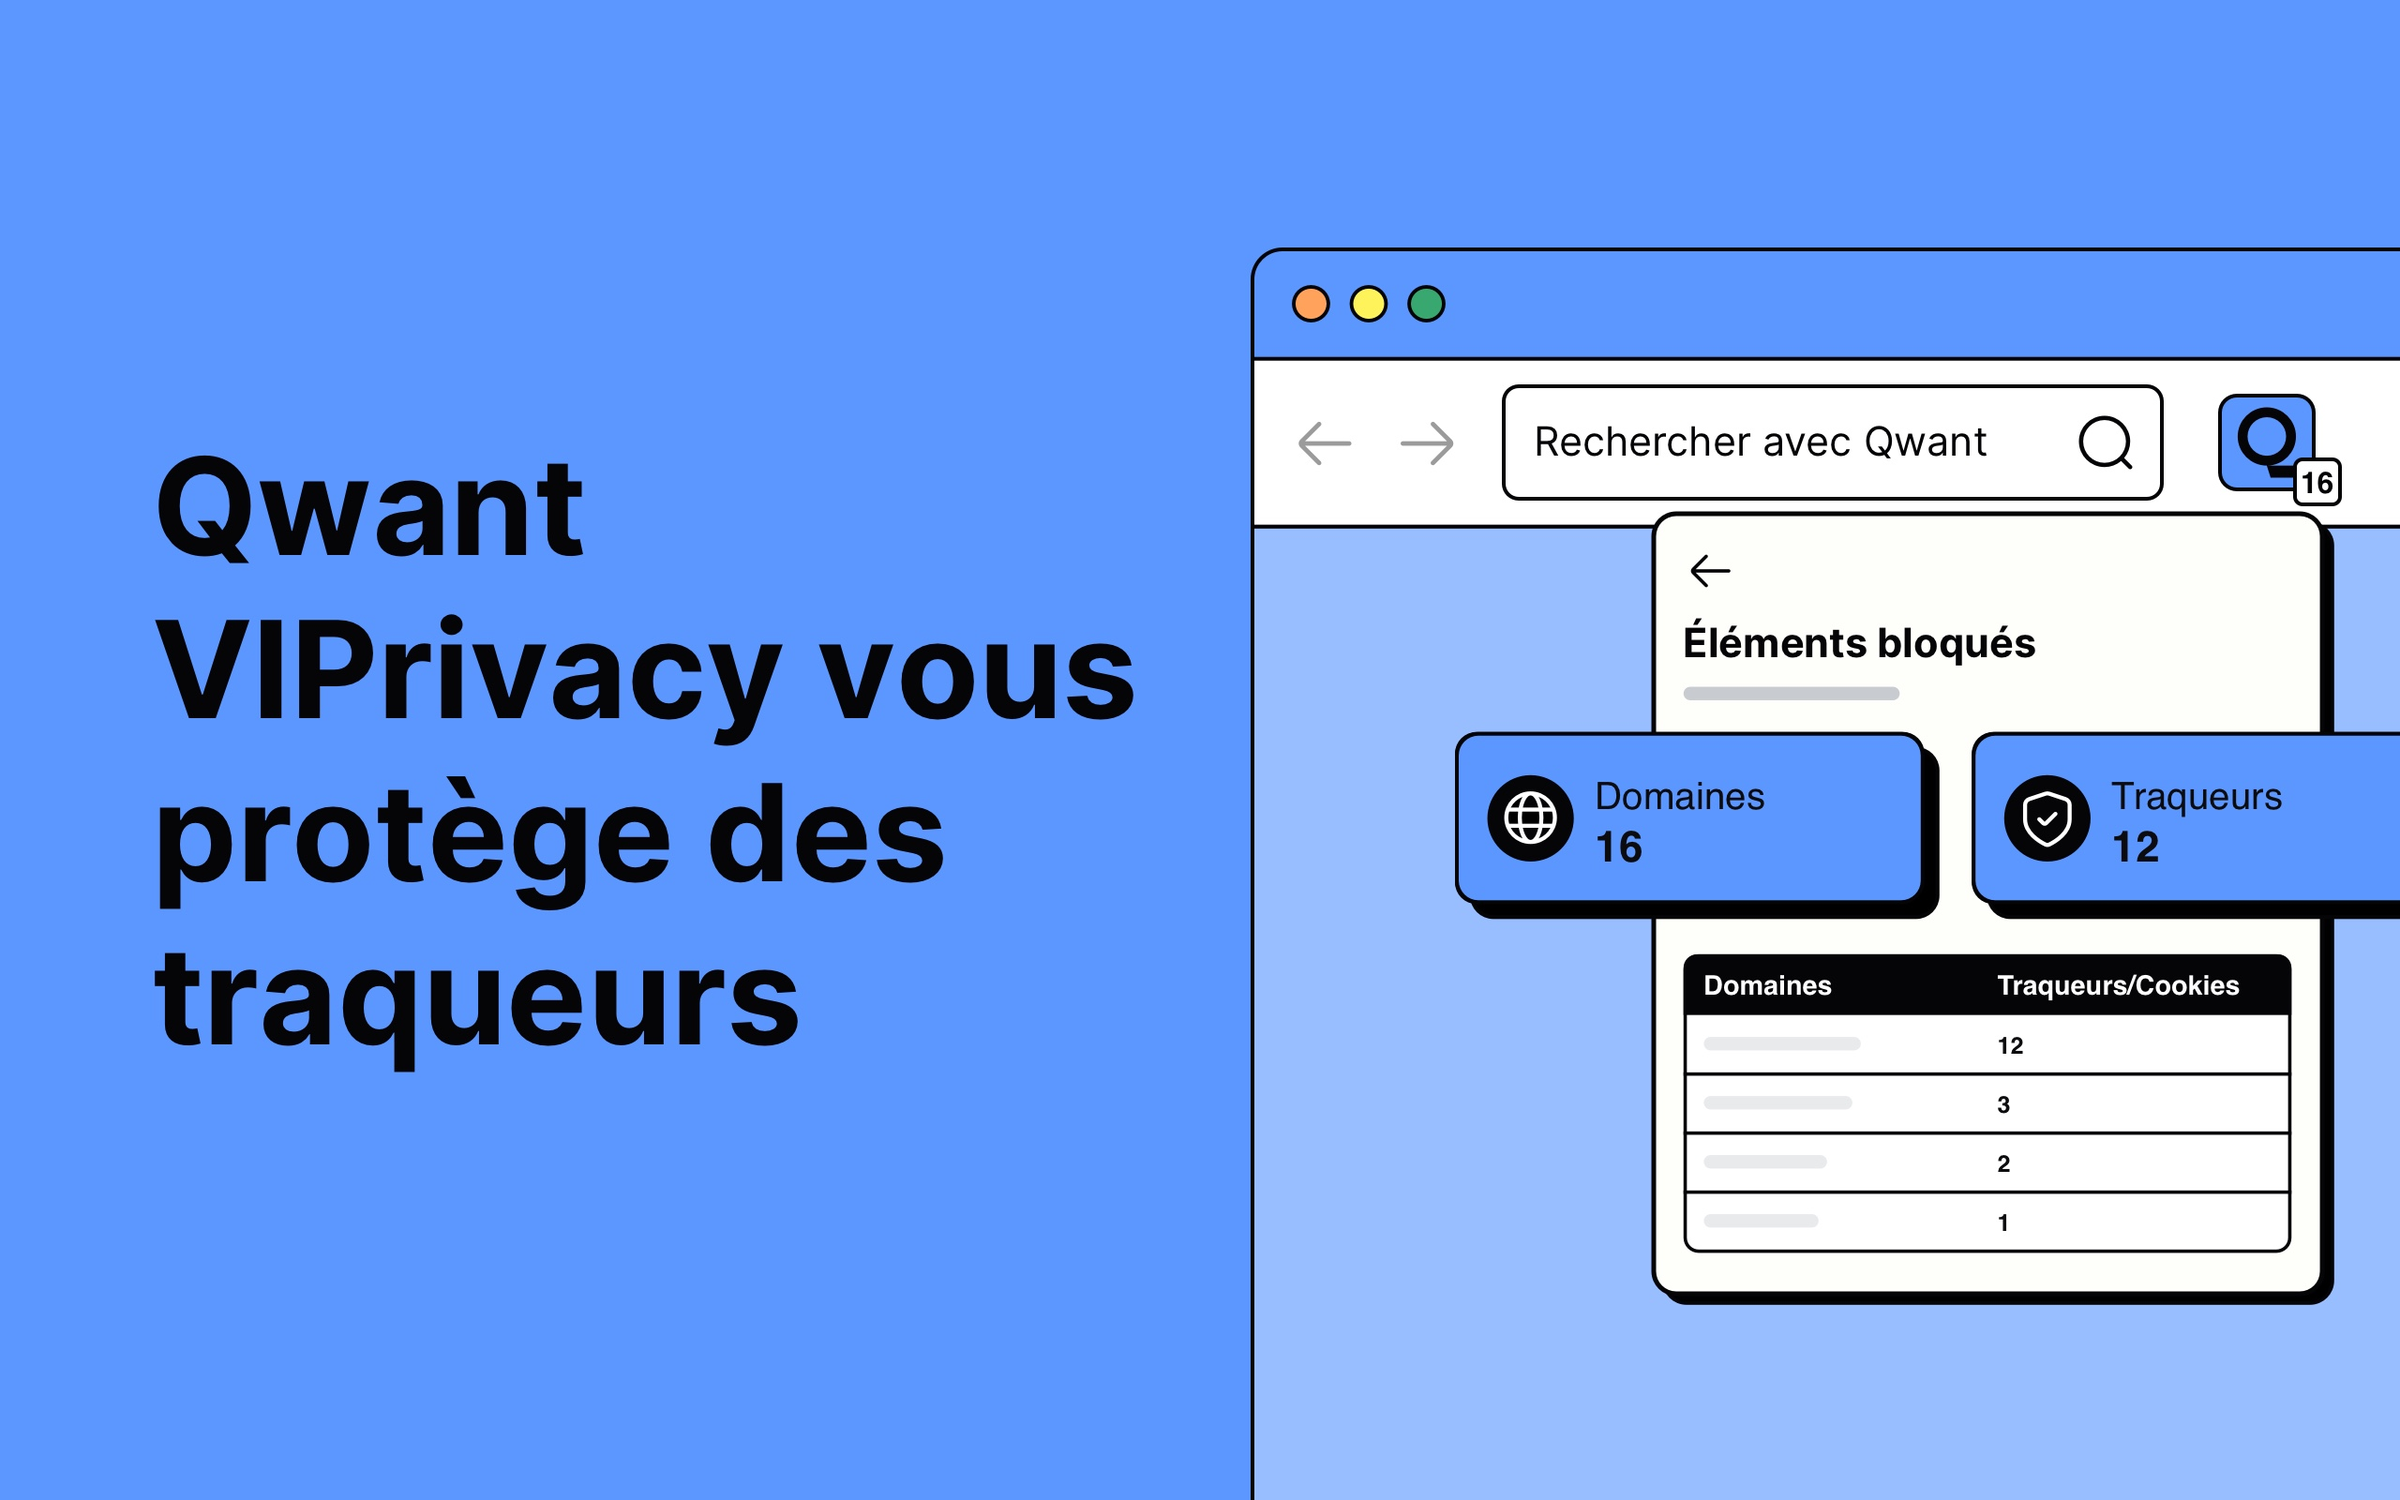 Qwant VIPrivacy